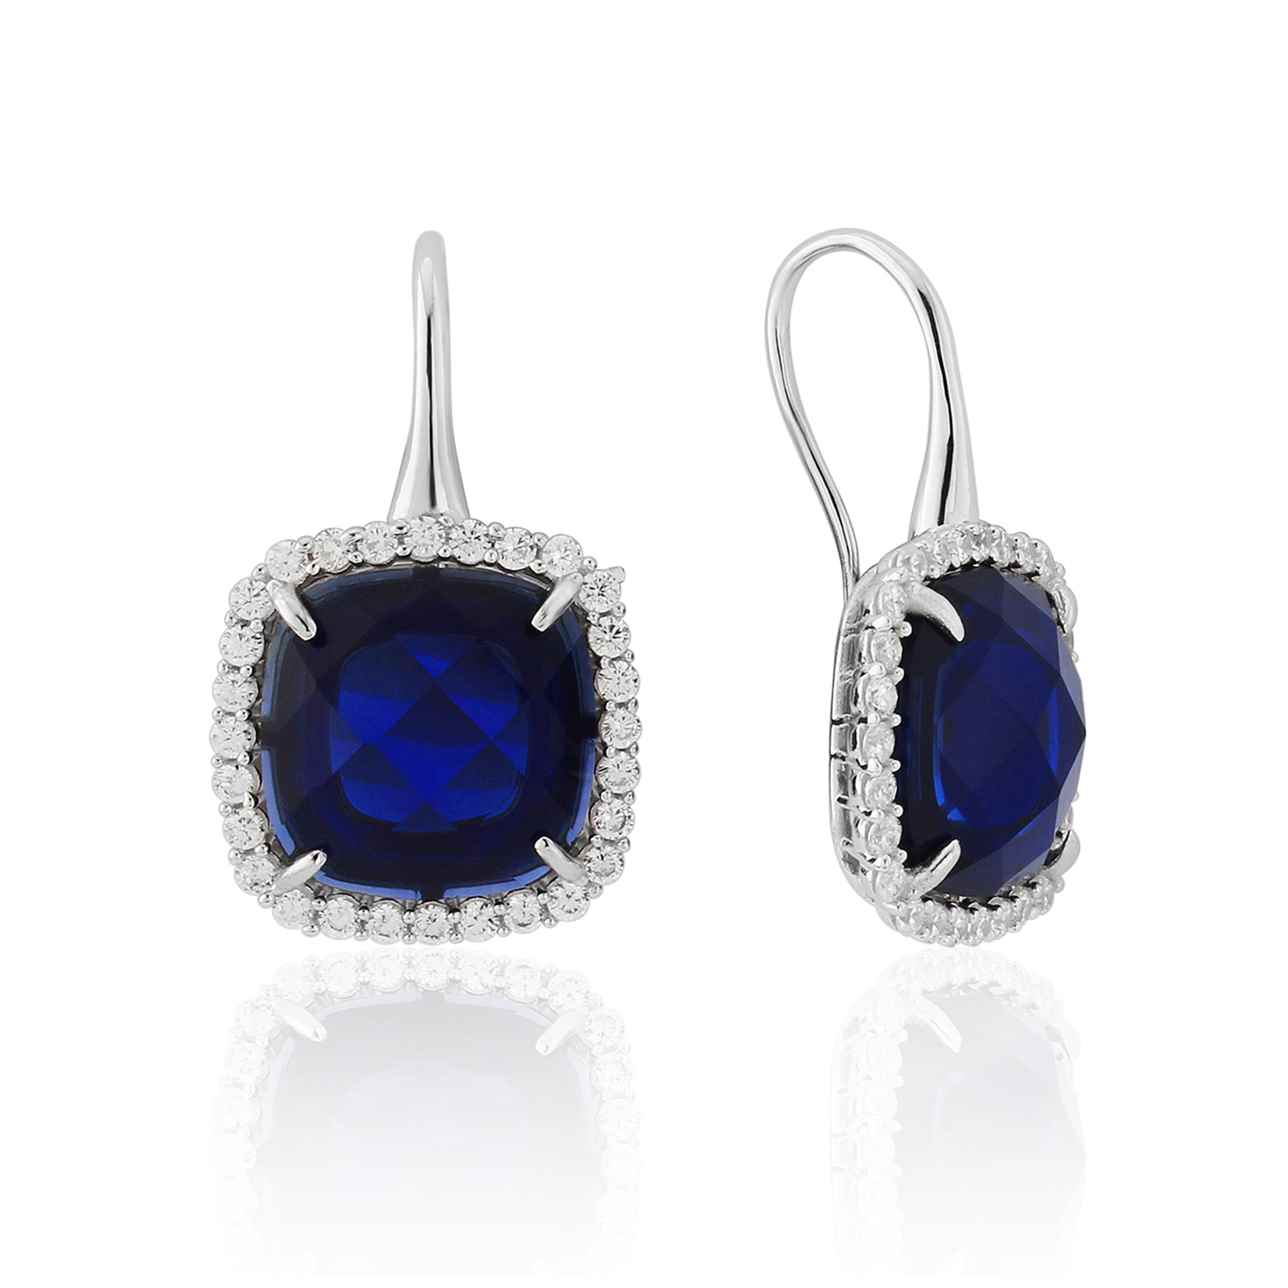 White Created Sapphire Cushion with Cubic Zirconia Earrings